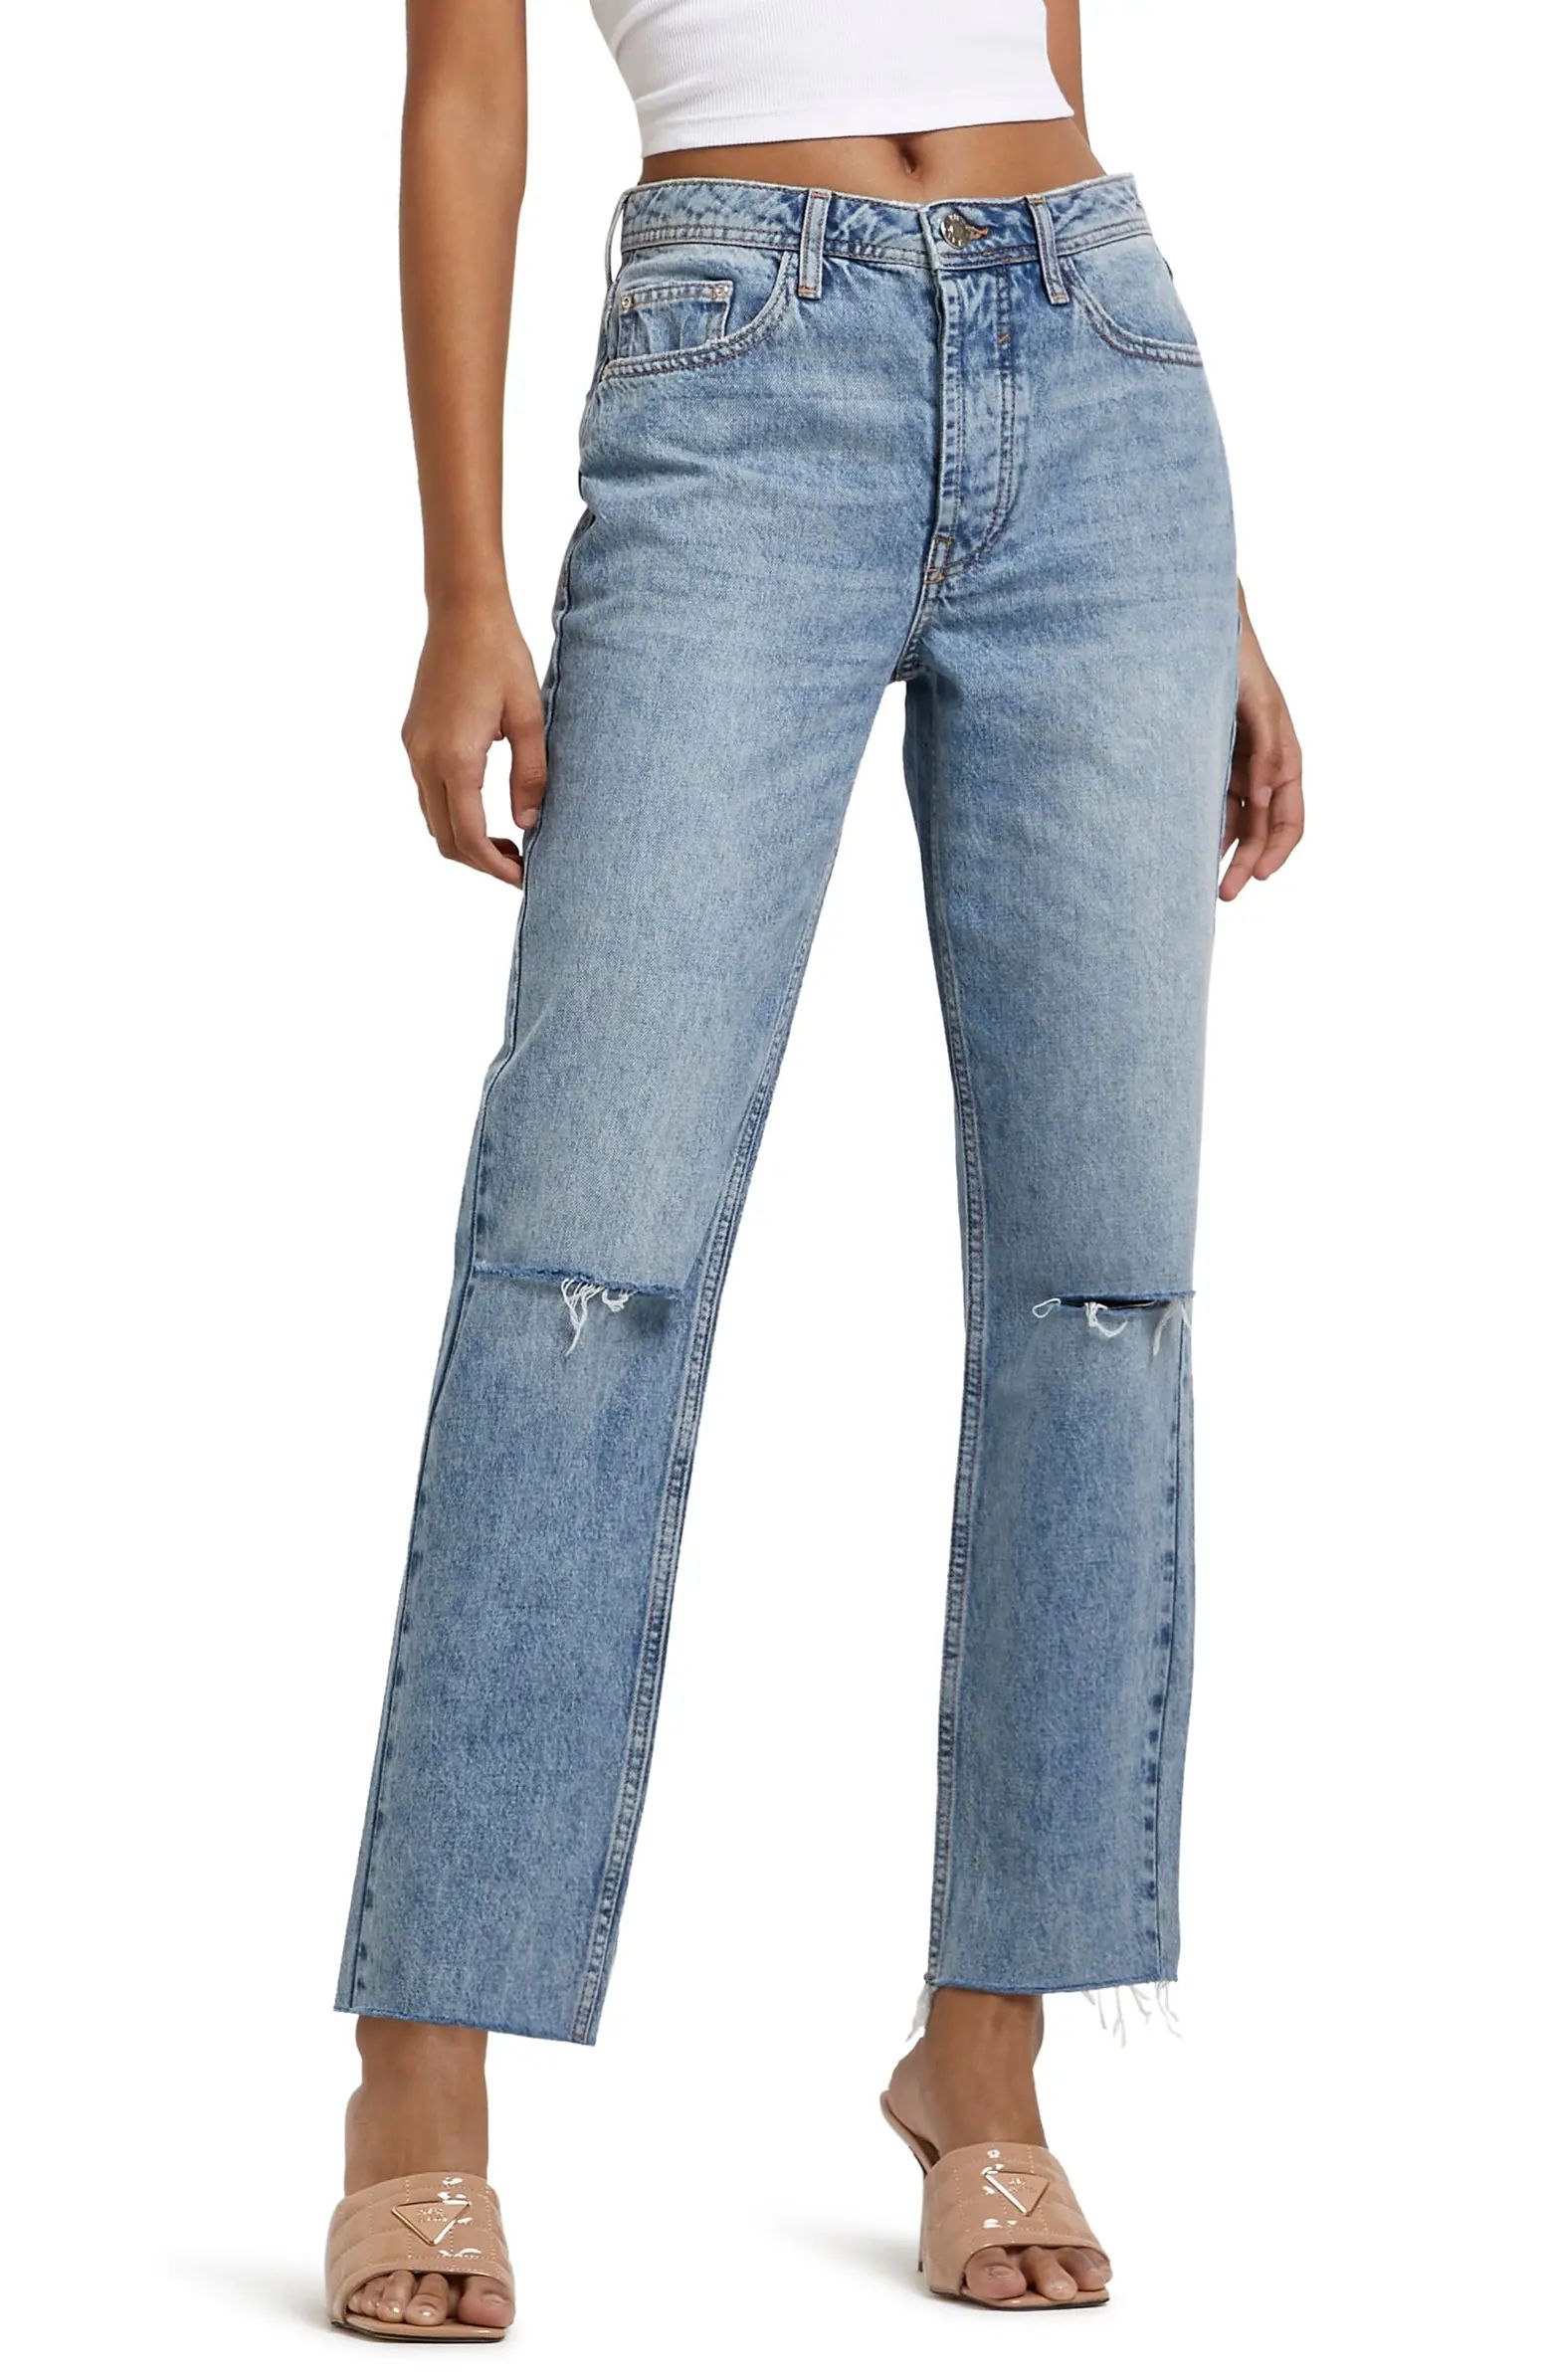 RIVER ISLAND Mr Cyrell Hastings Ripped High Waist Straight Leg Jeans | Nordstrom | Nordstrom